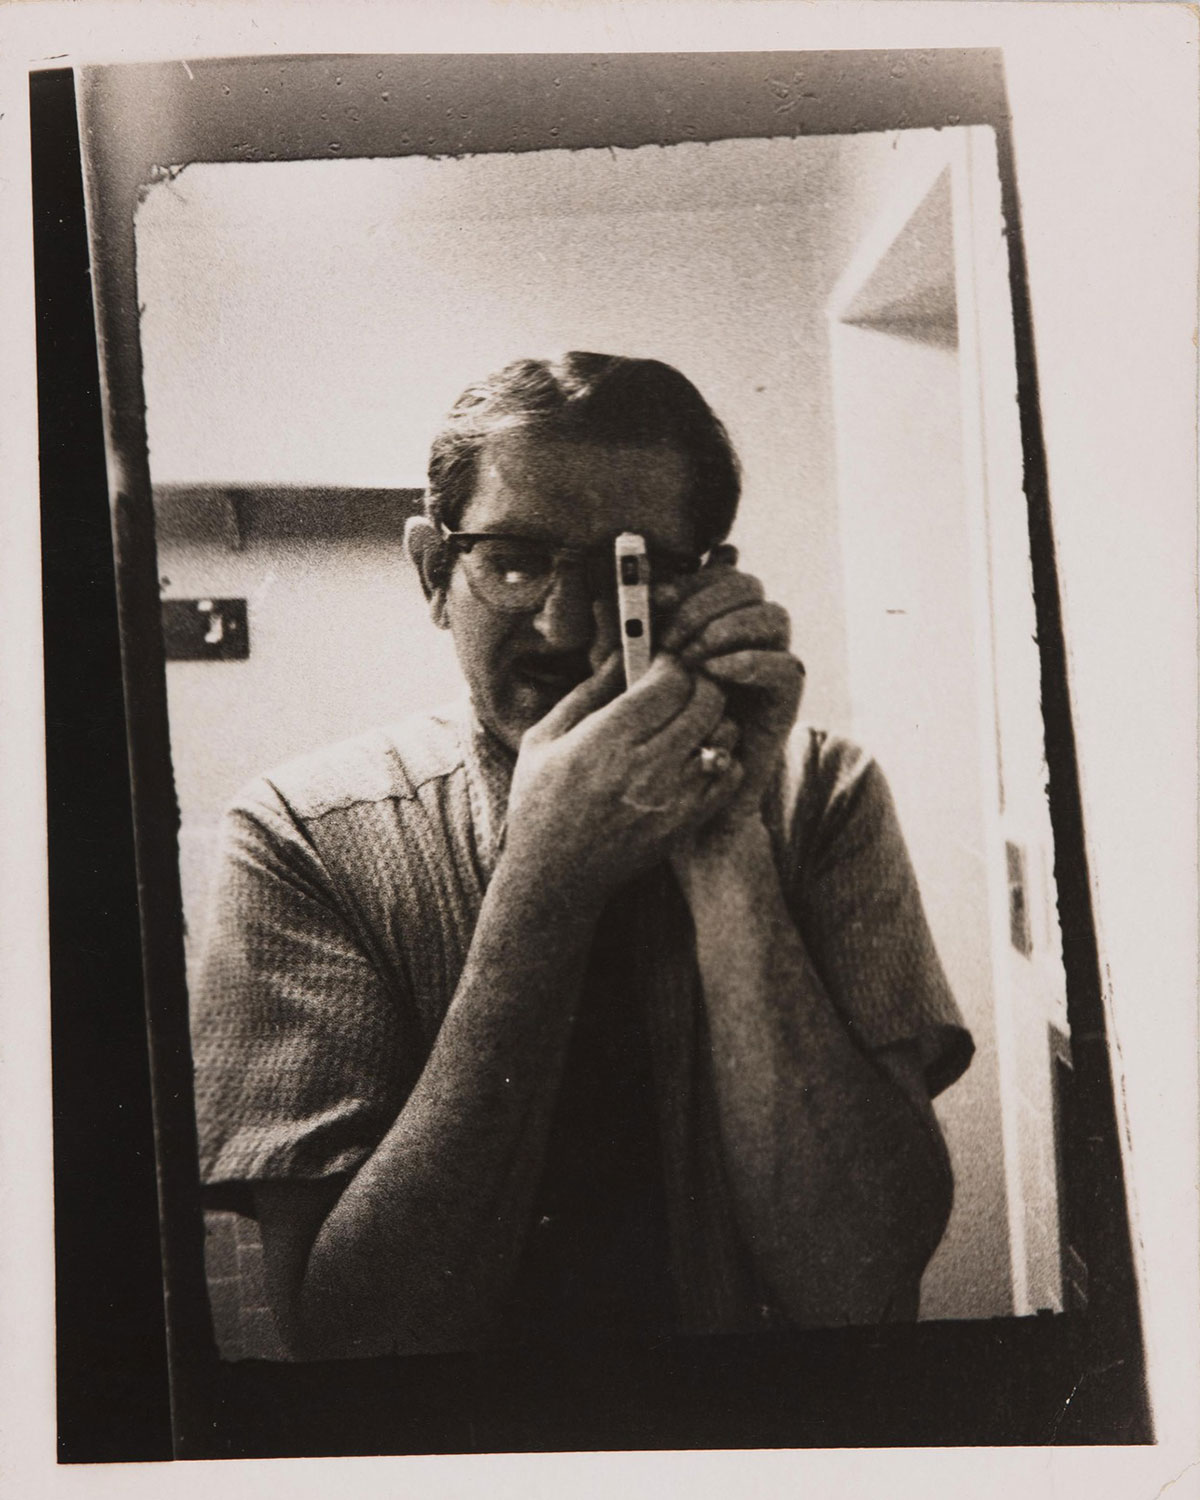 A man wearing a loose t-shirt and glasses holds a small camera up to his eye